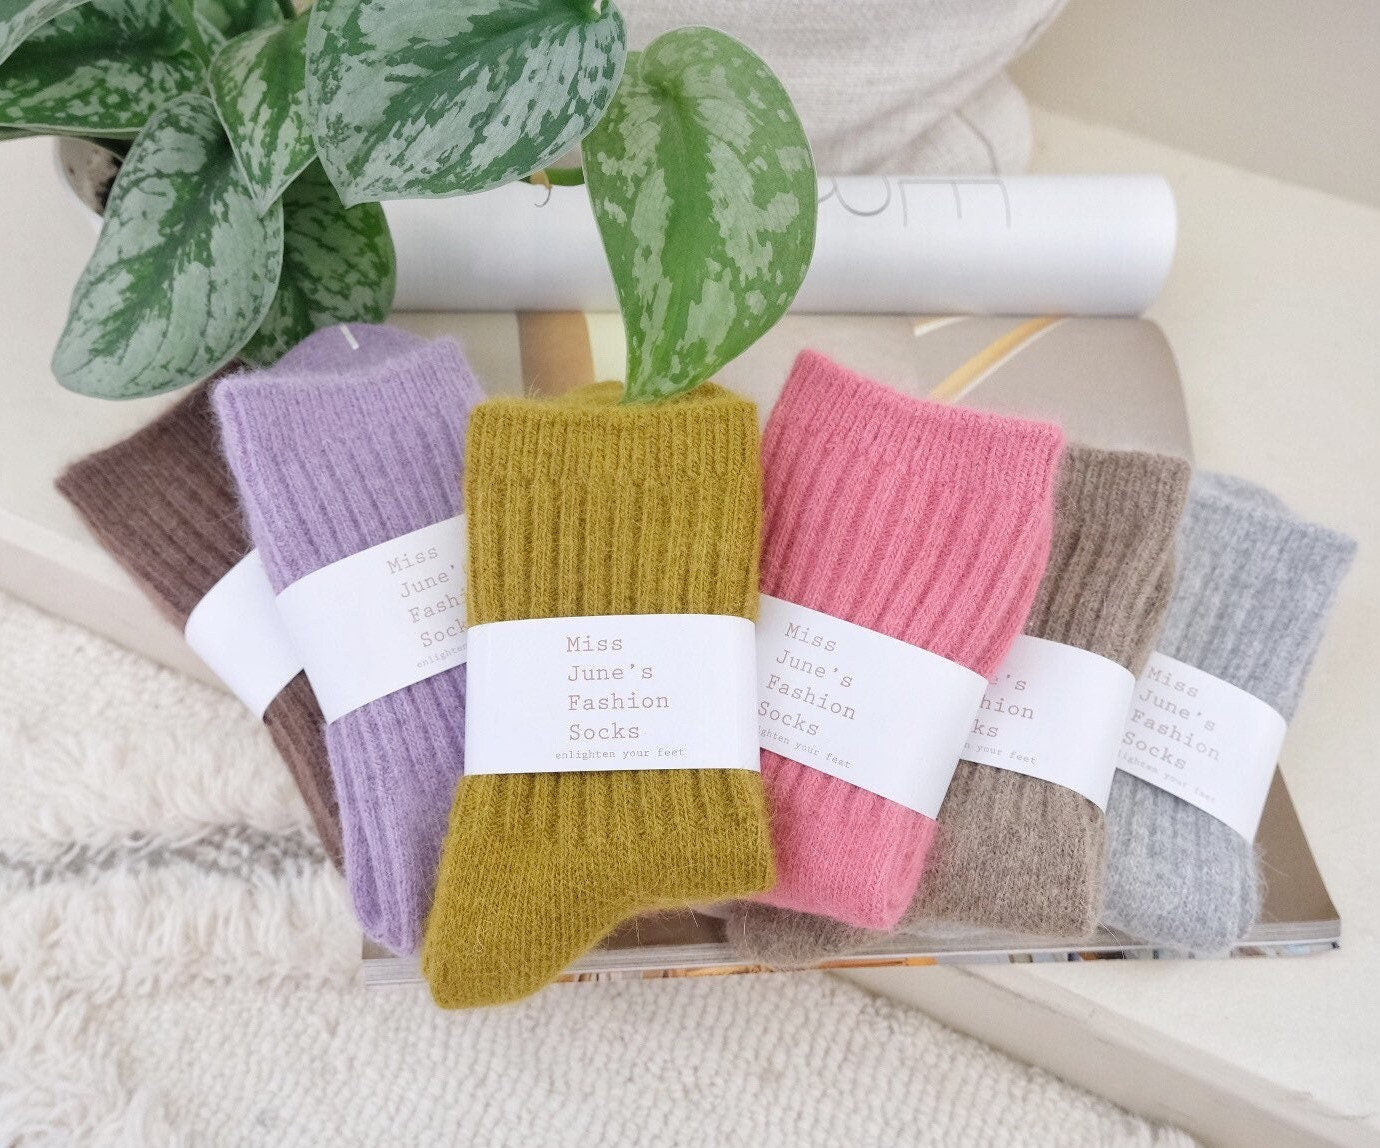 Miss June’s| Women’s | Angora rabbit blended socks | 1 Pair | Winter| Warm | Soft | High quality| Gift idea | New year| Thicker |Cozy